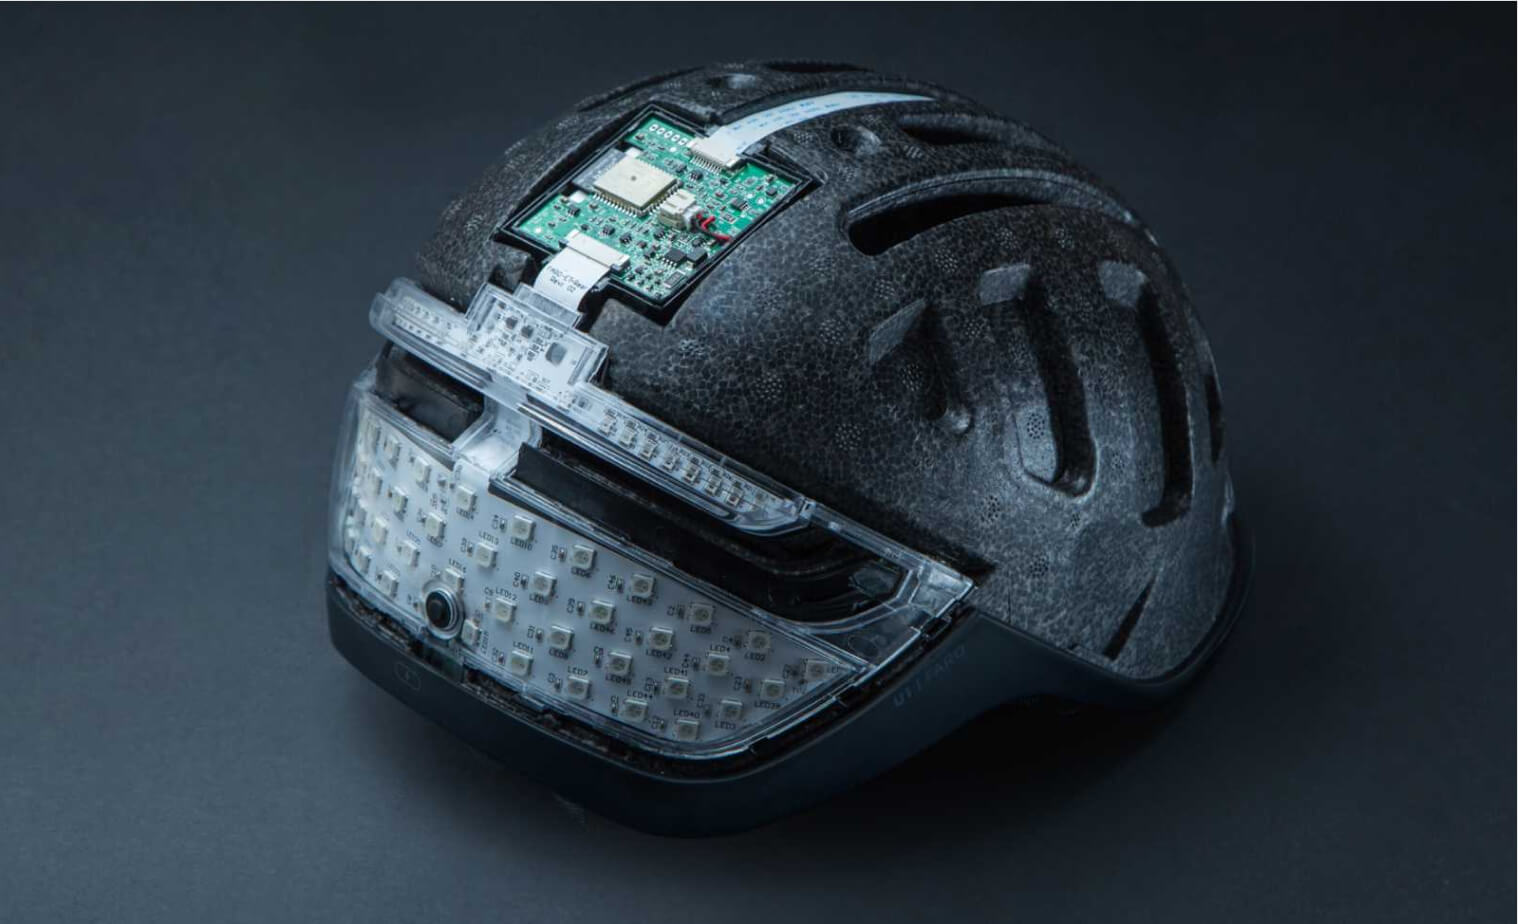 Electronics in FARO smart helmet with lights and +500 lumens | UNIT 1